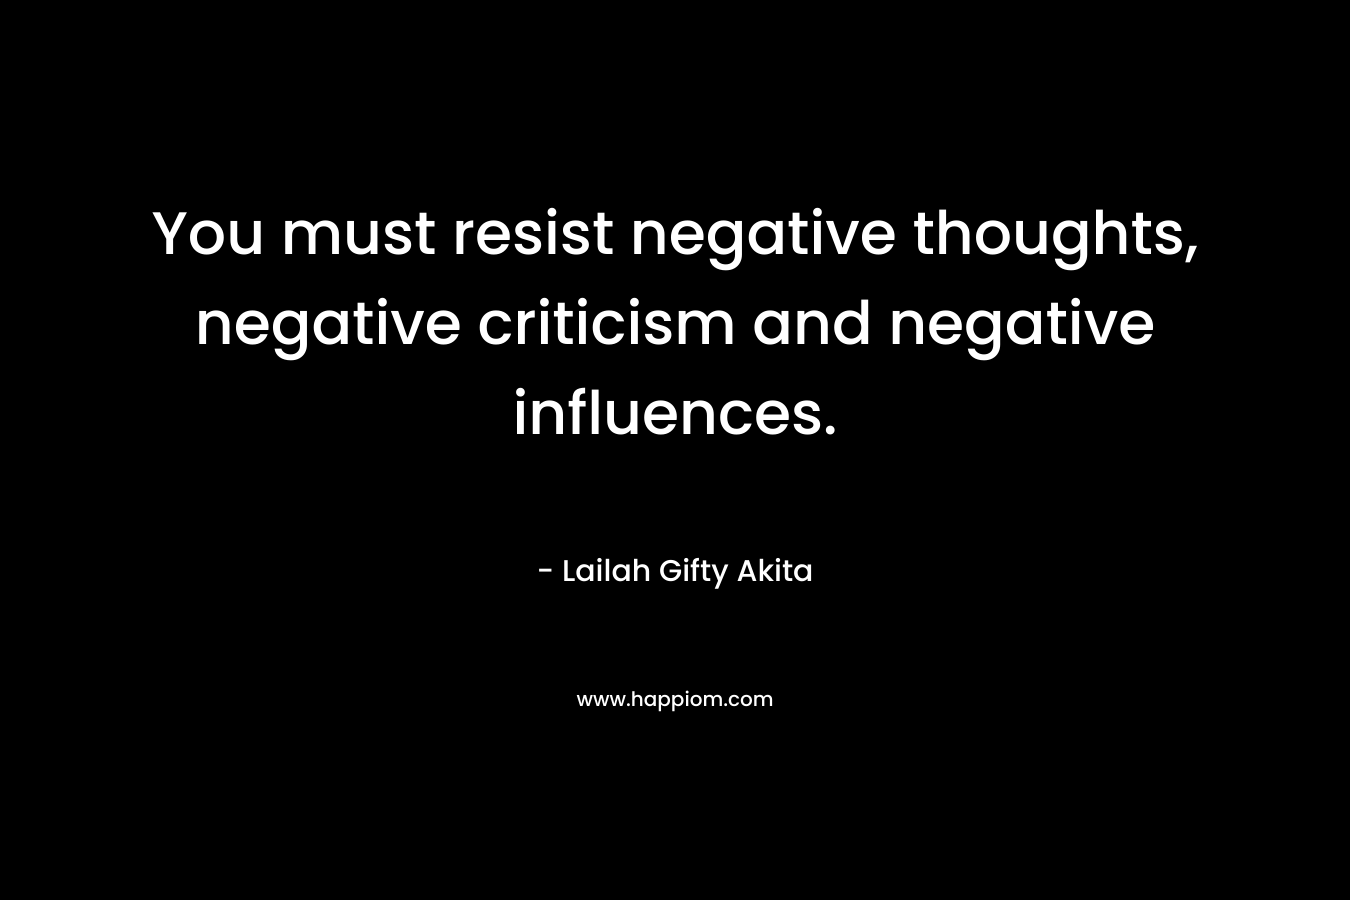 You must resist negative thoughts, negative criticism and negative influences.